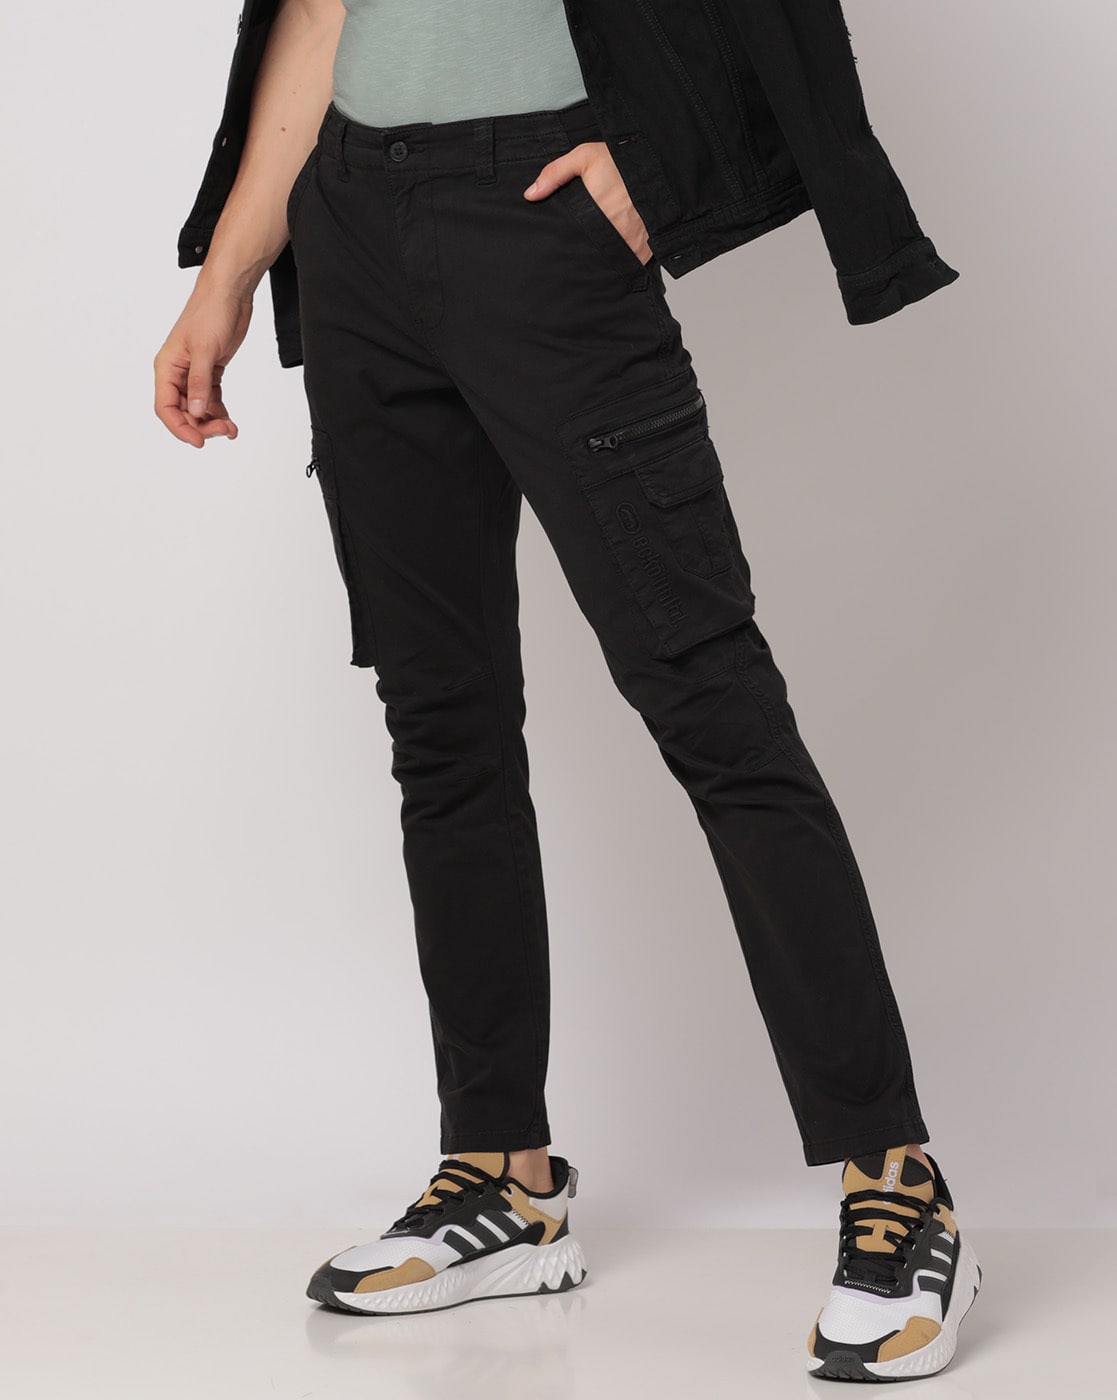 Men Korean Fashion Tapered Cargo Trousers Oversize Pockets Casual  Sweatpants New  eBay